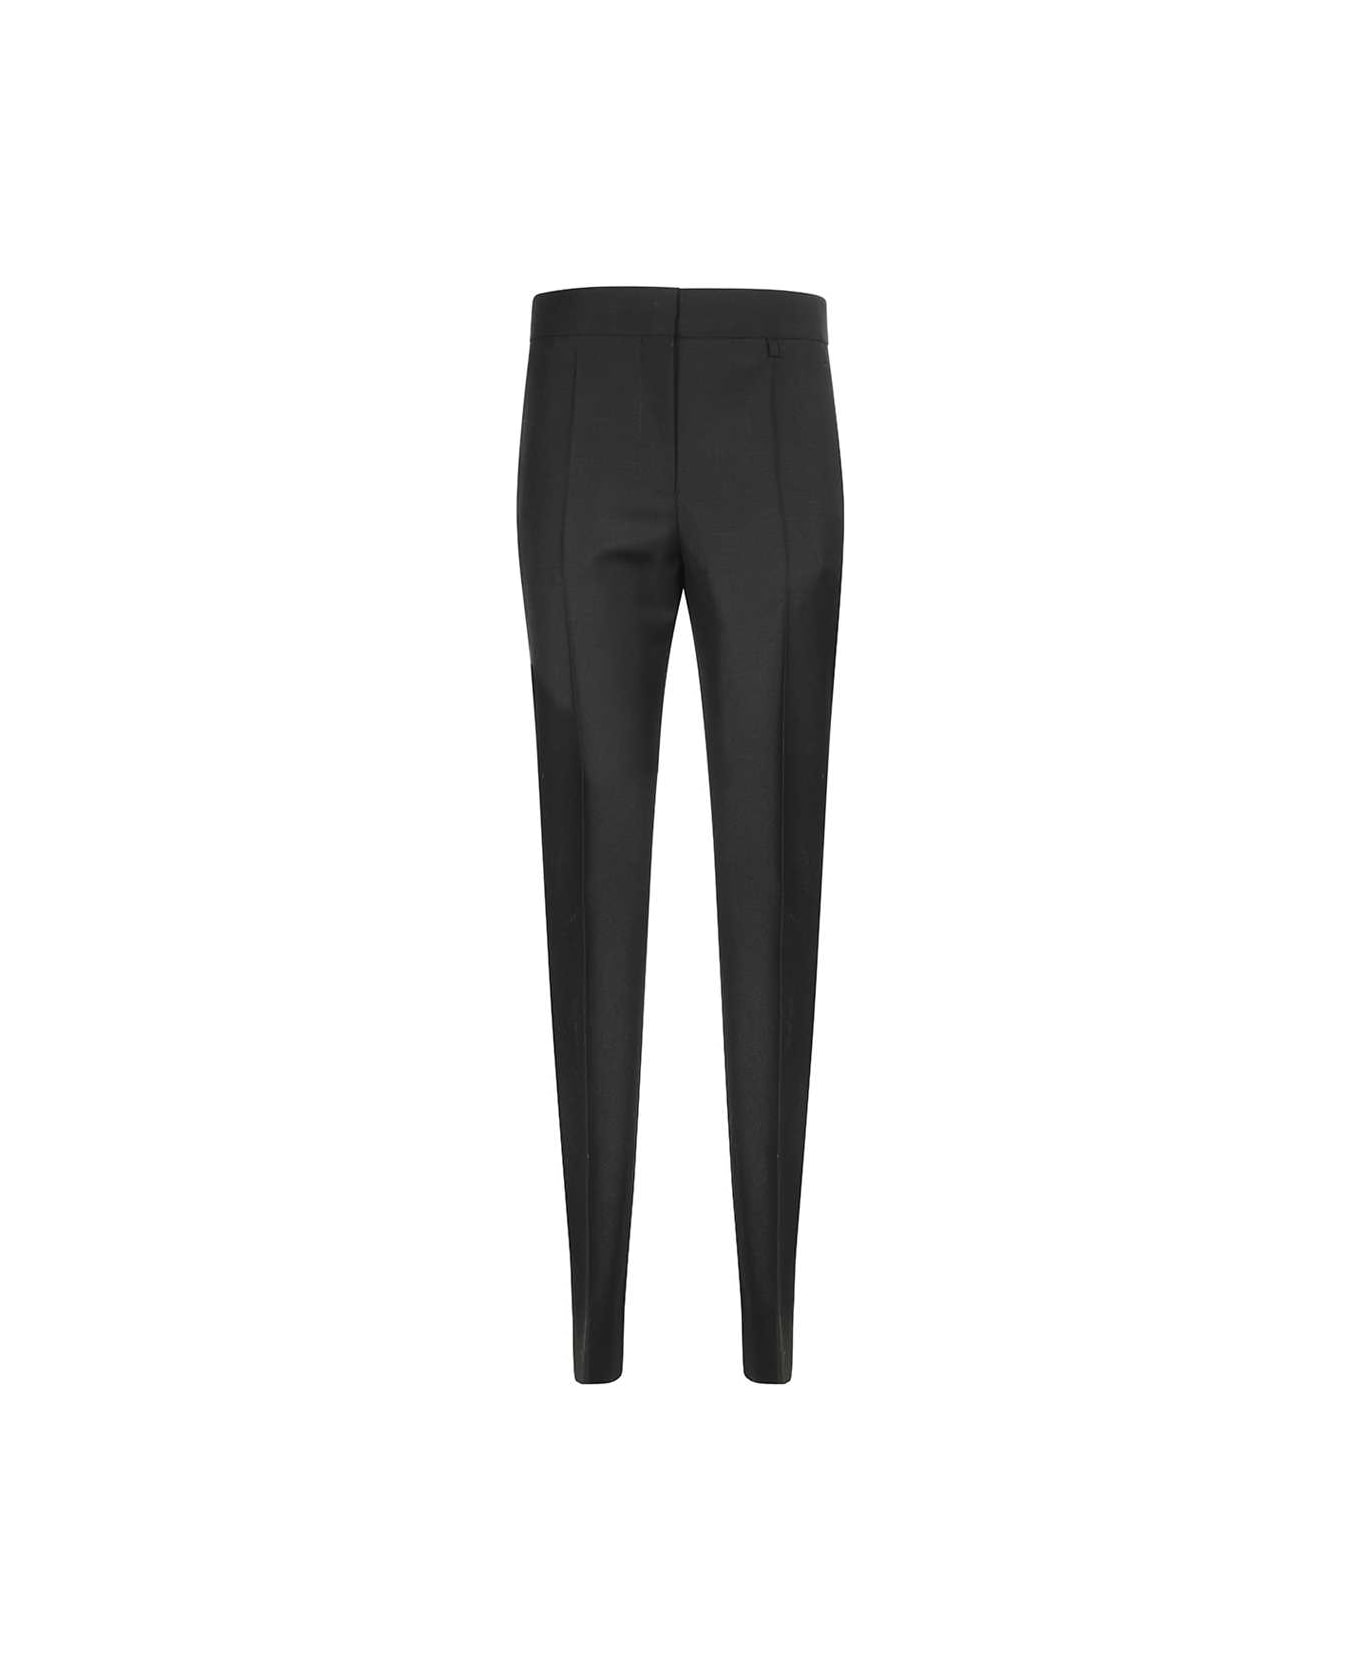 Givenchy Wool Blend Trousers - black ボトムス